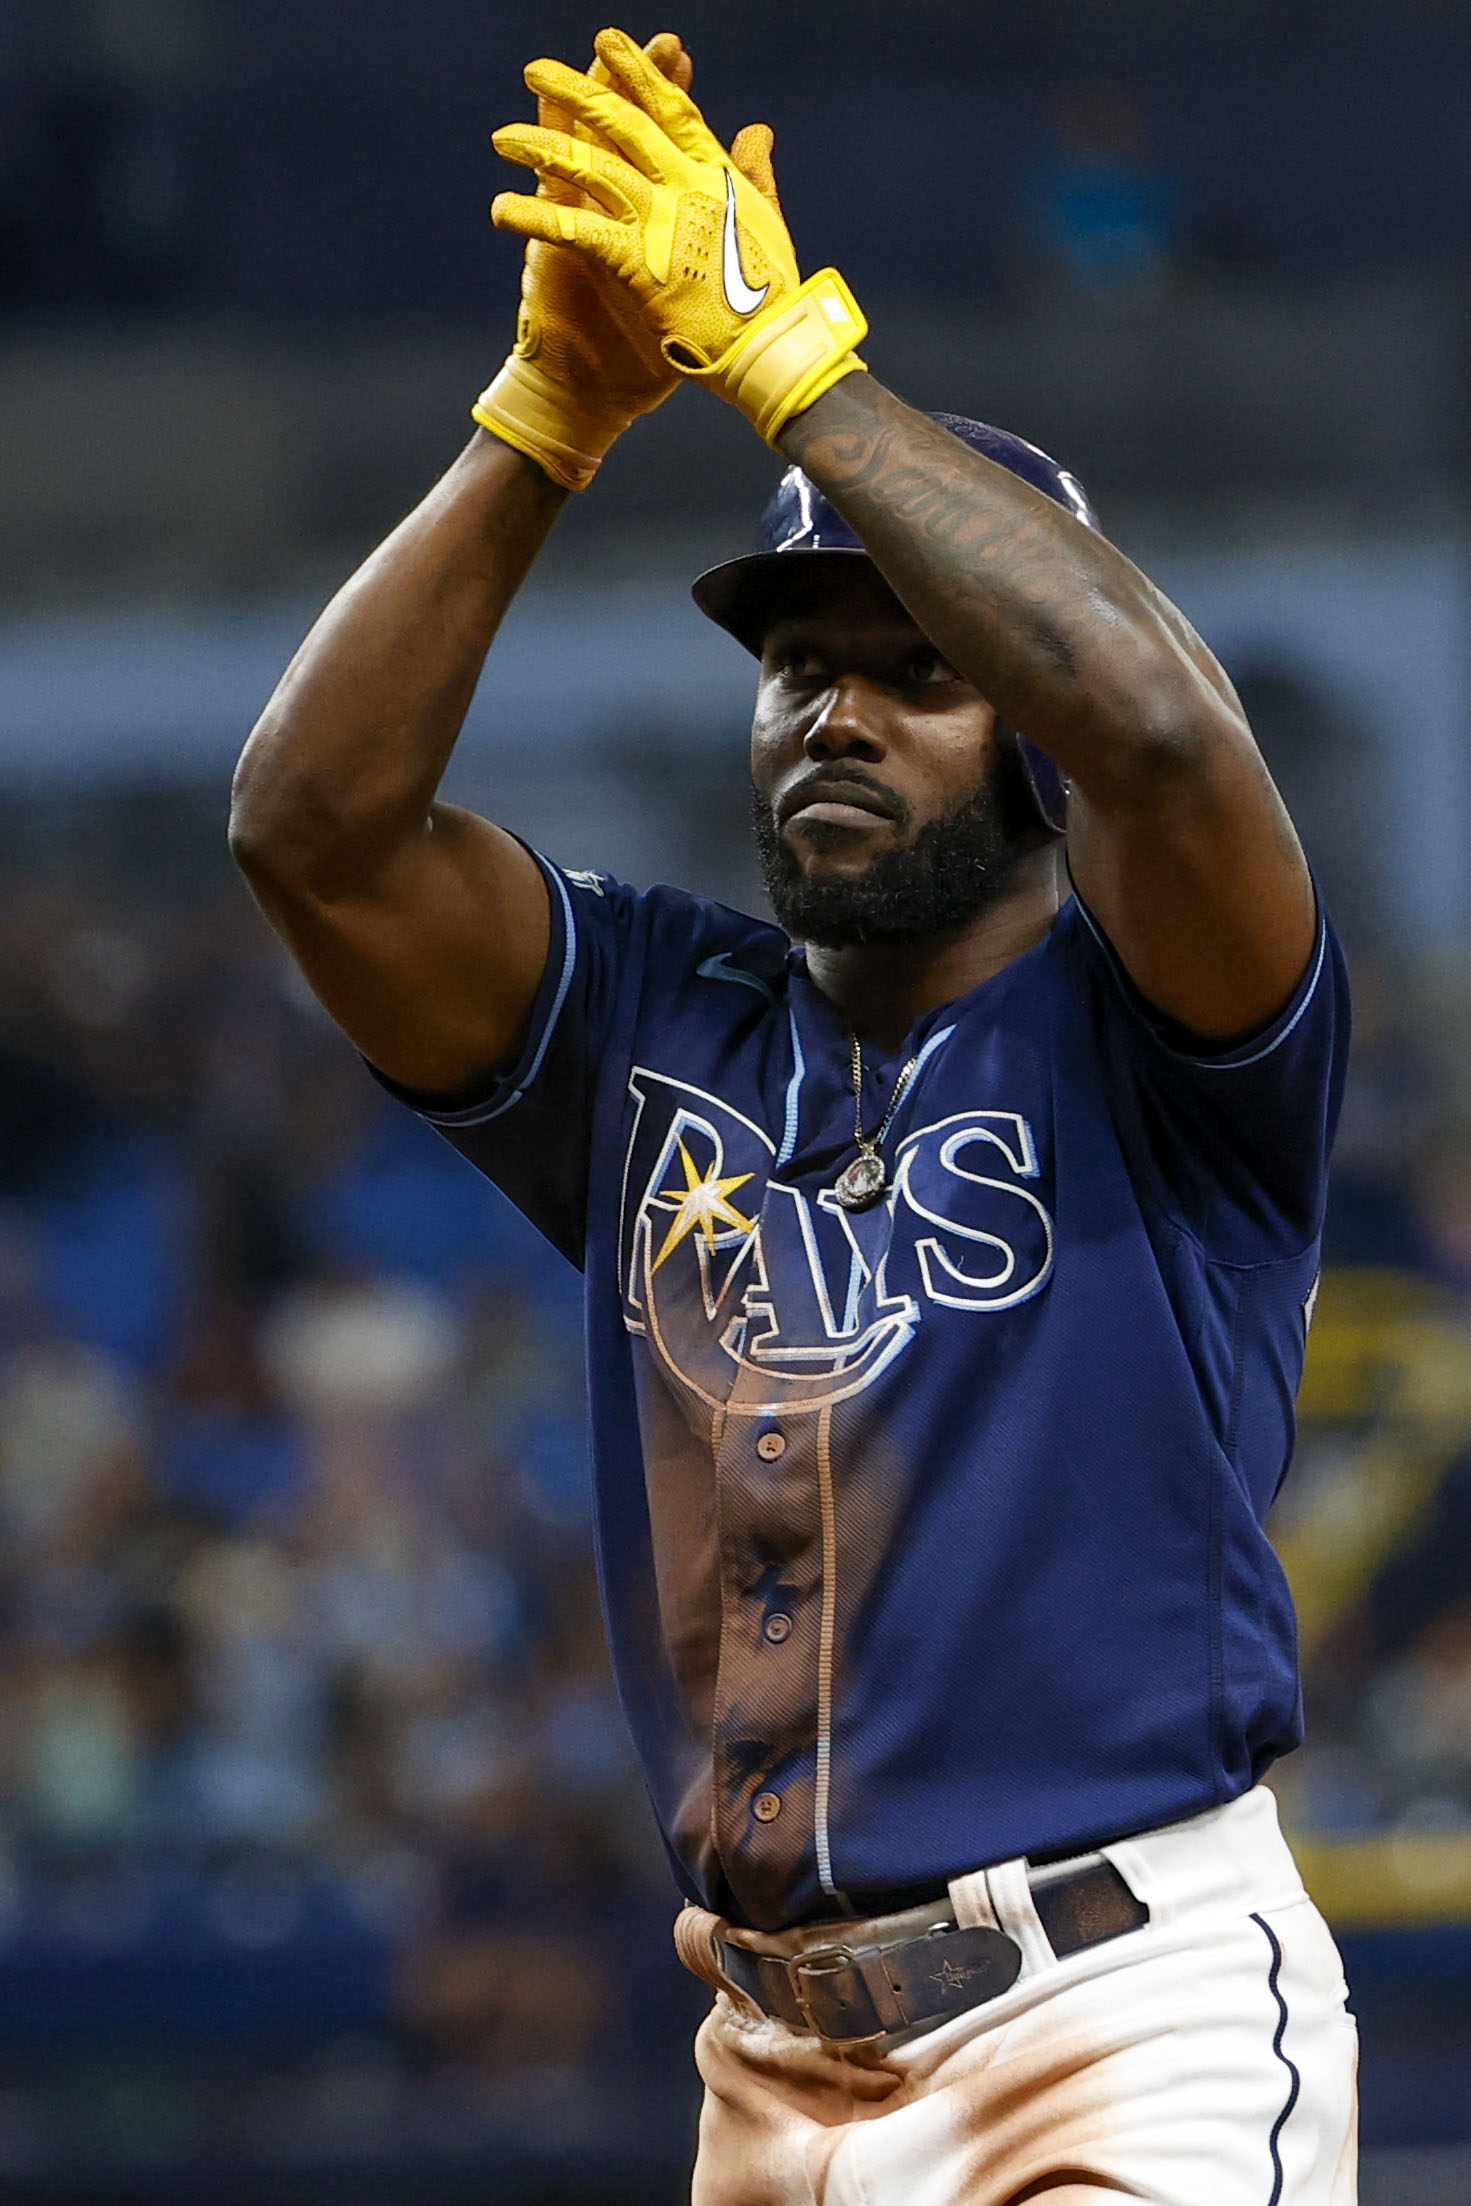 4 things the Rays learned about themselves through season's first half